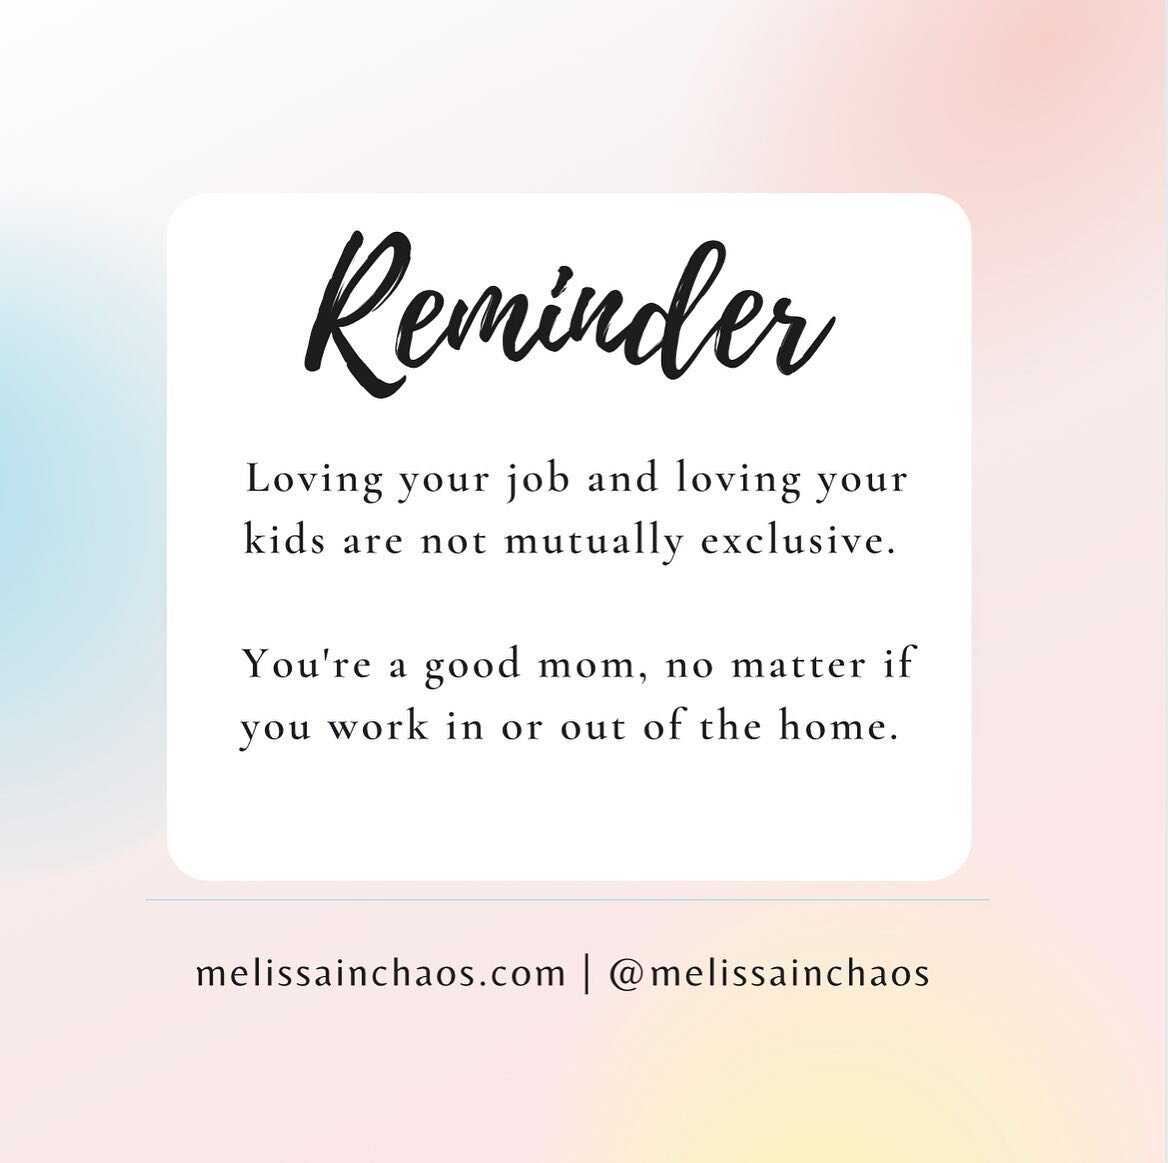 Being a working mom is hard.
Being a stay at home mom is hard.
Being a work from home mom is hard.

You know what they all have in common???

They are all ℎ𝑎𝑟𝑑.

somewhere along the lines we have set the stage that if you LOVE your job you must lo